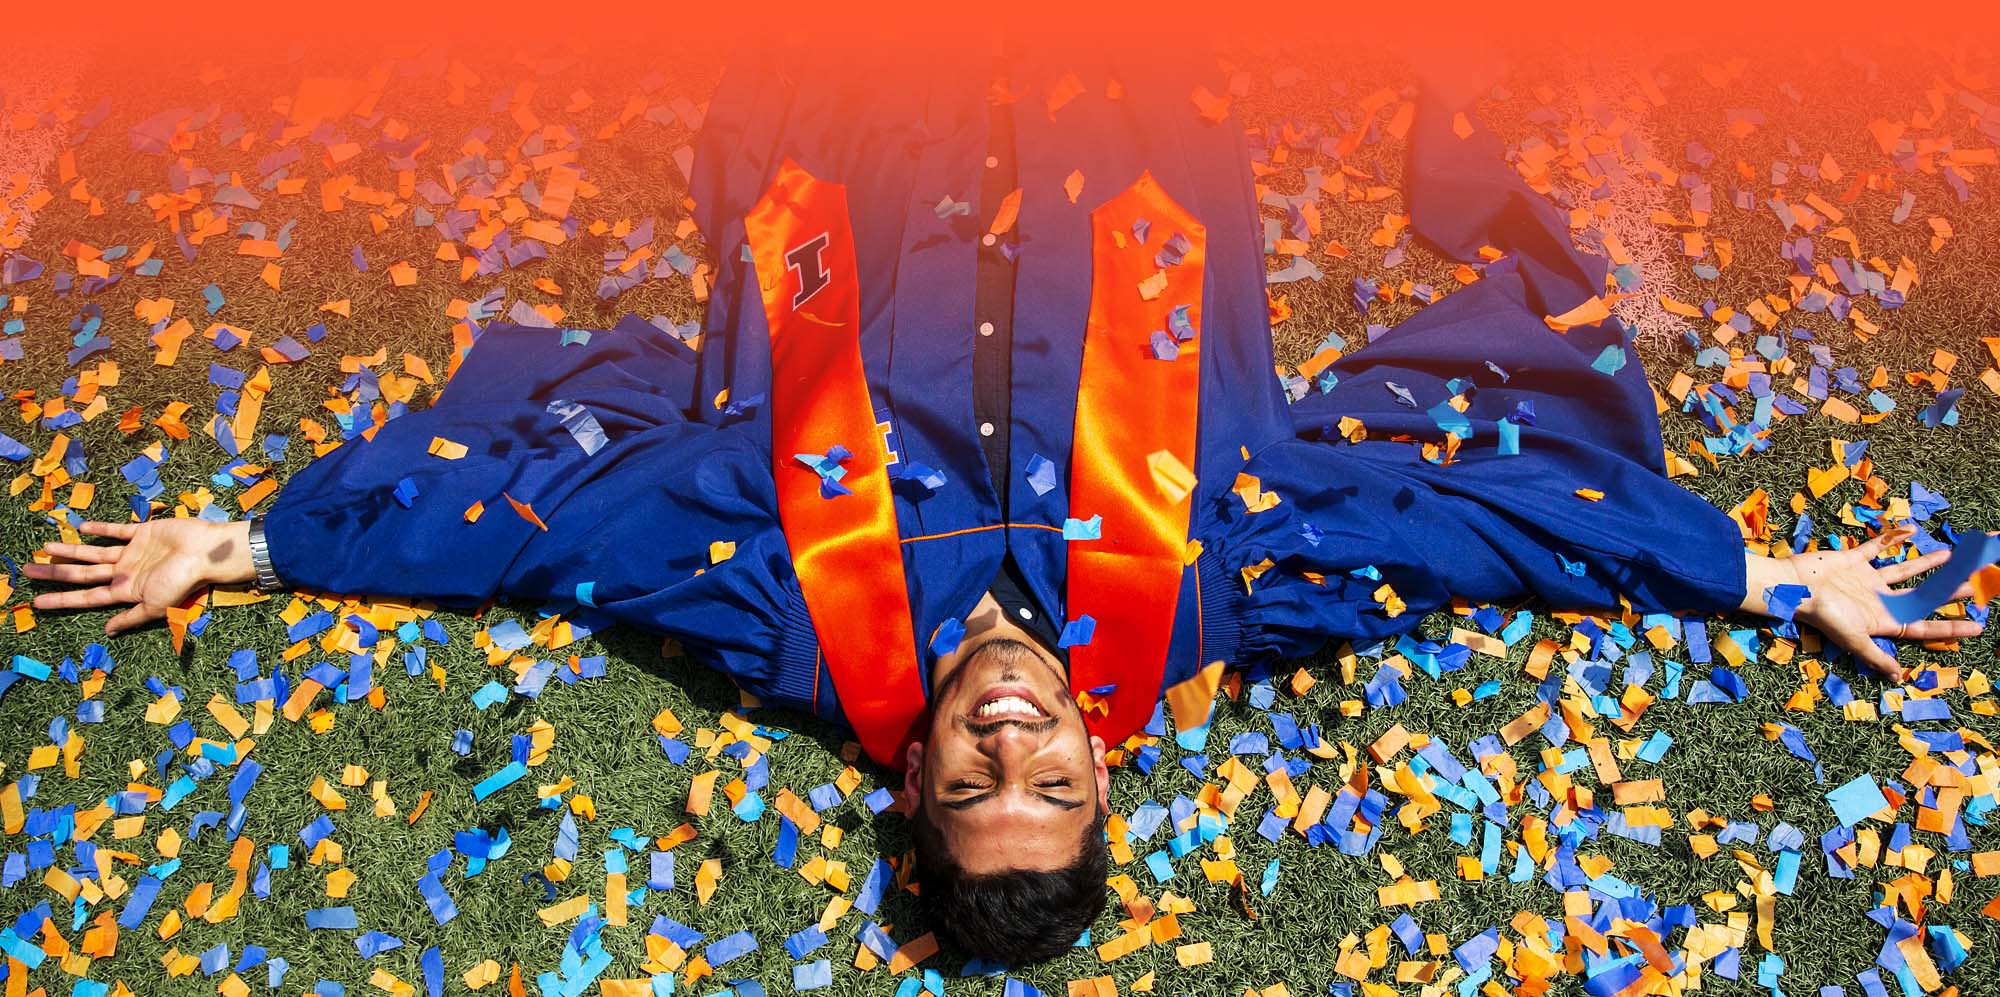 recent graduate laying in a pile of confetti celebrating during commencement at Memorial Stadium